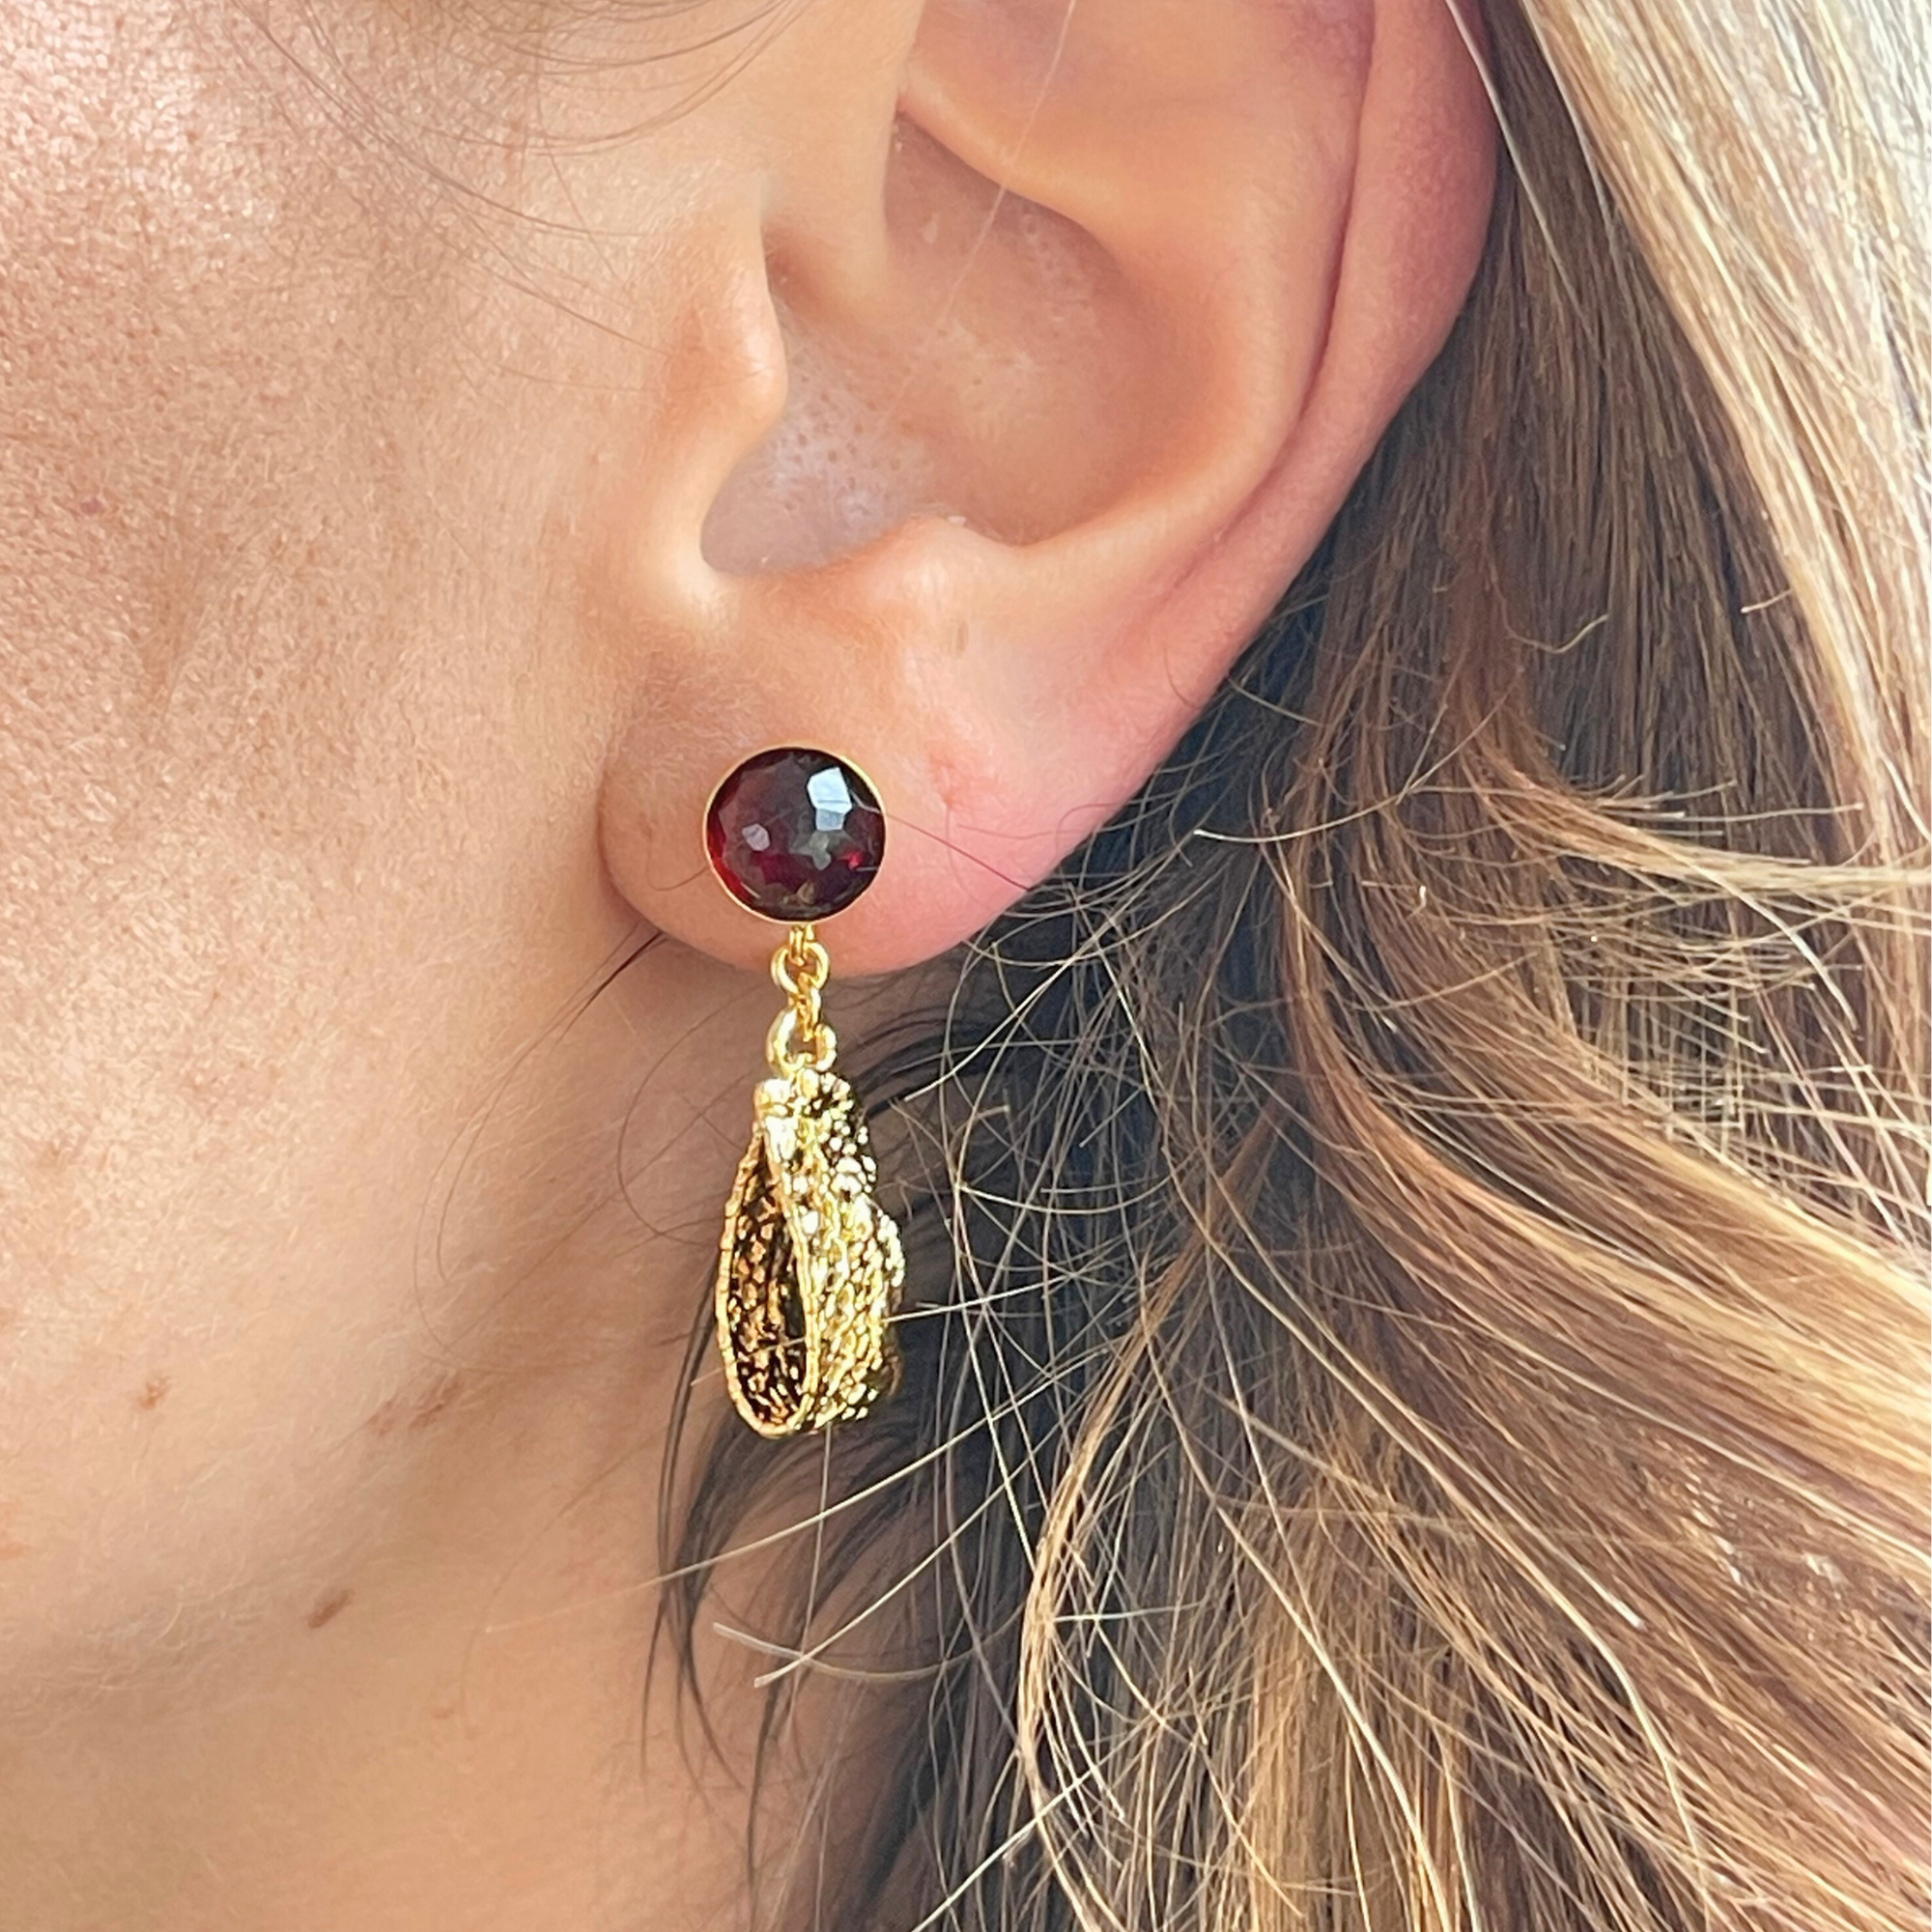 Ines lace earrings in 24k gold with faceted Garnets.